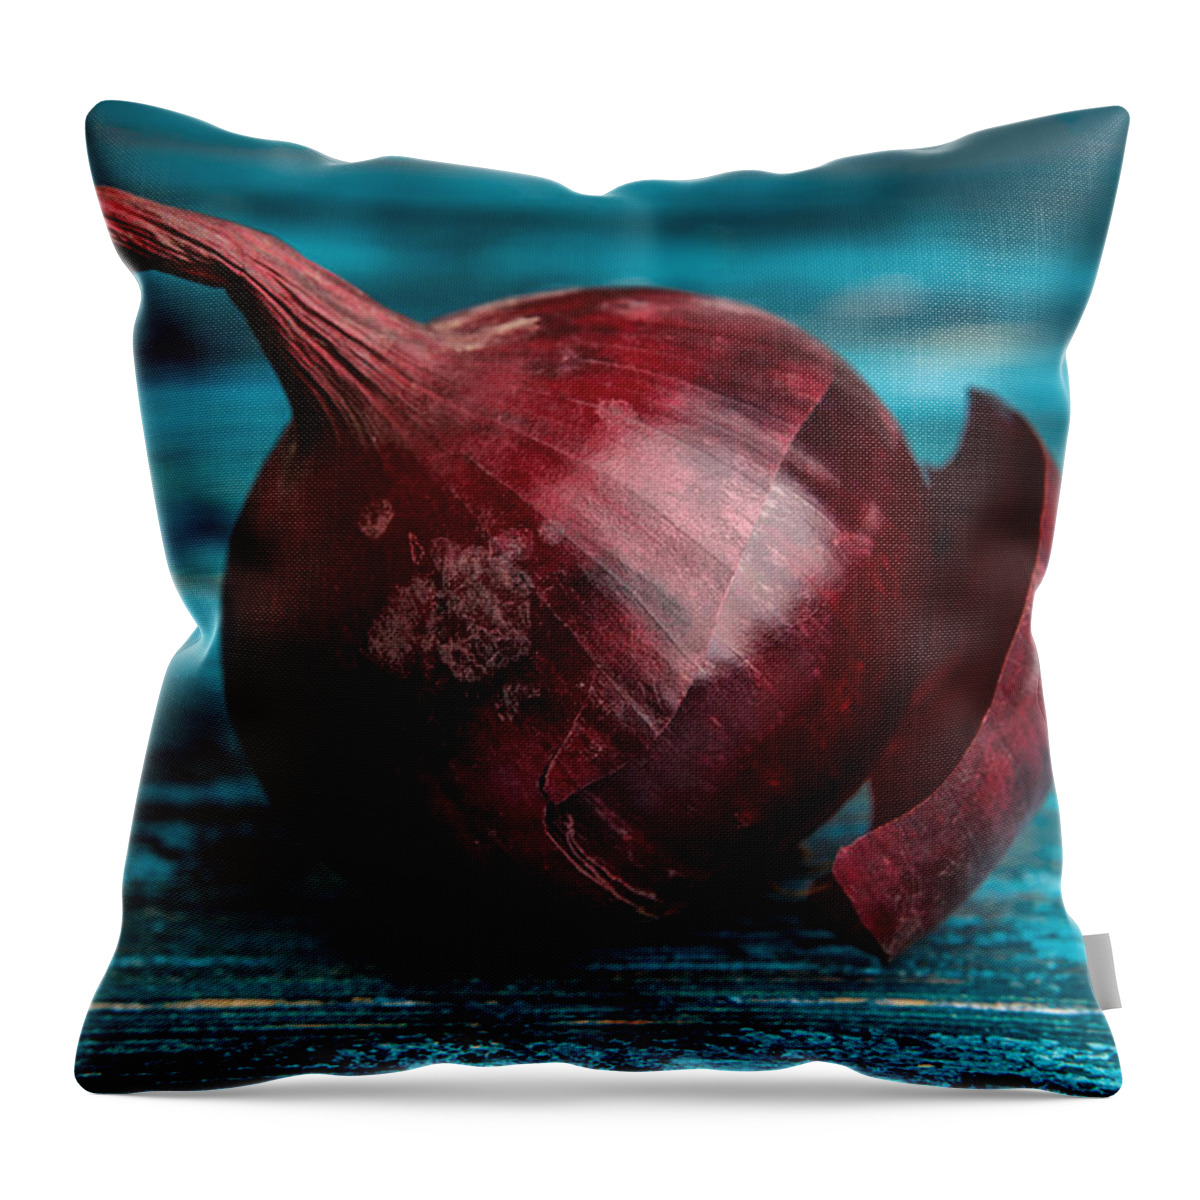 Onion Throw Pillow featuring the photograph Red Onions by Nailia Schwarz